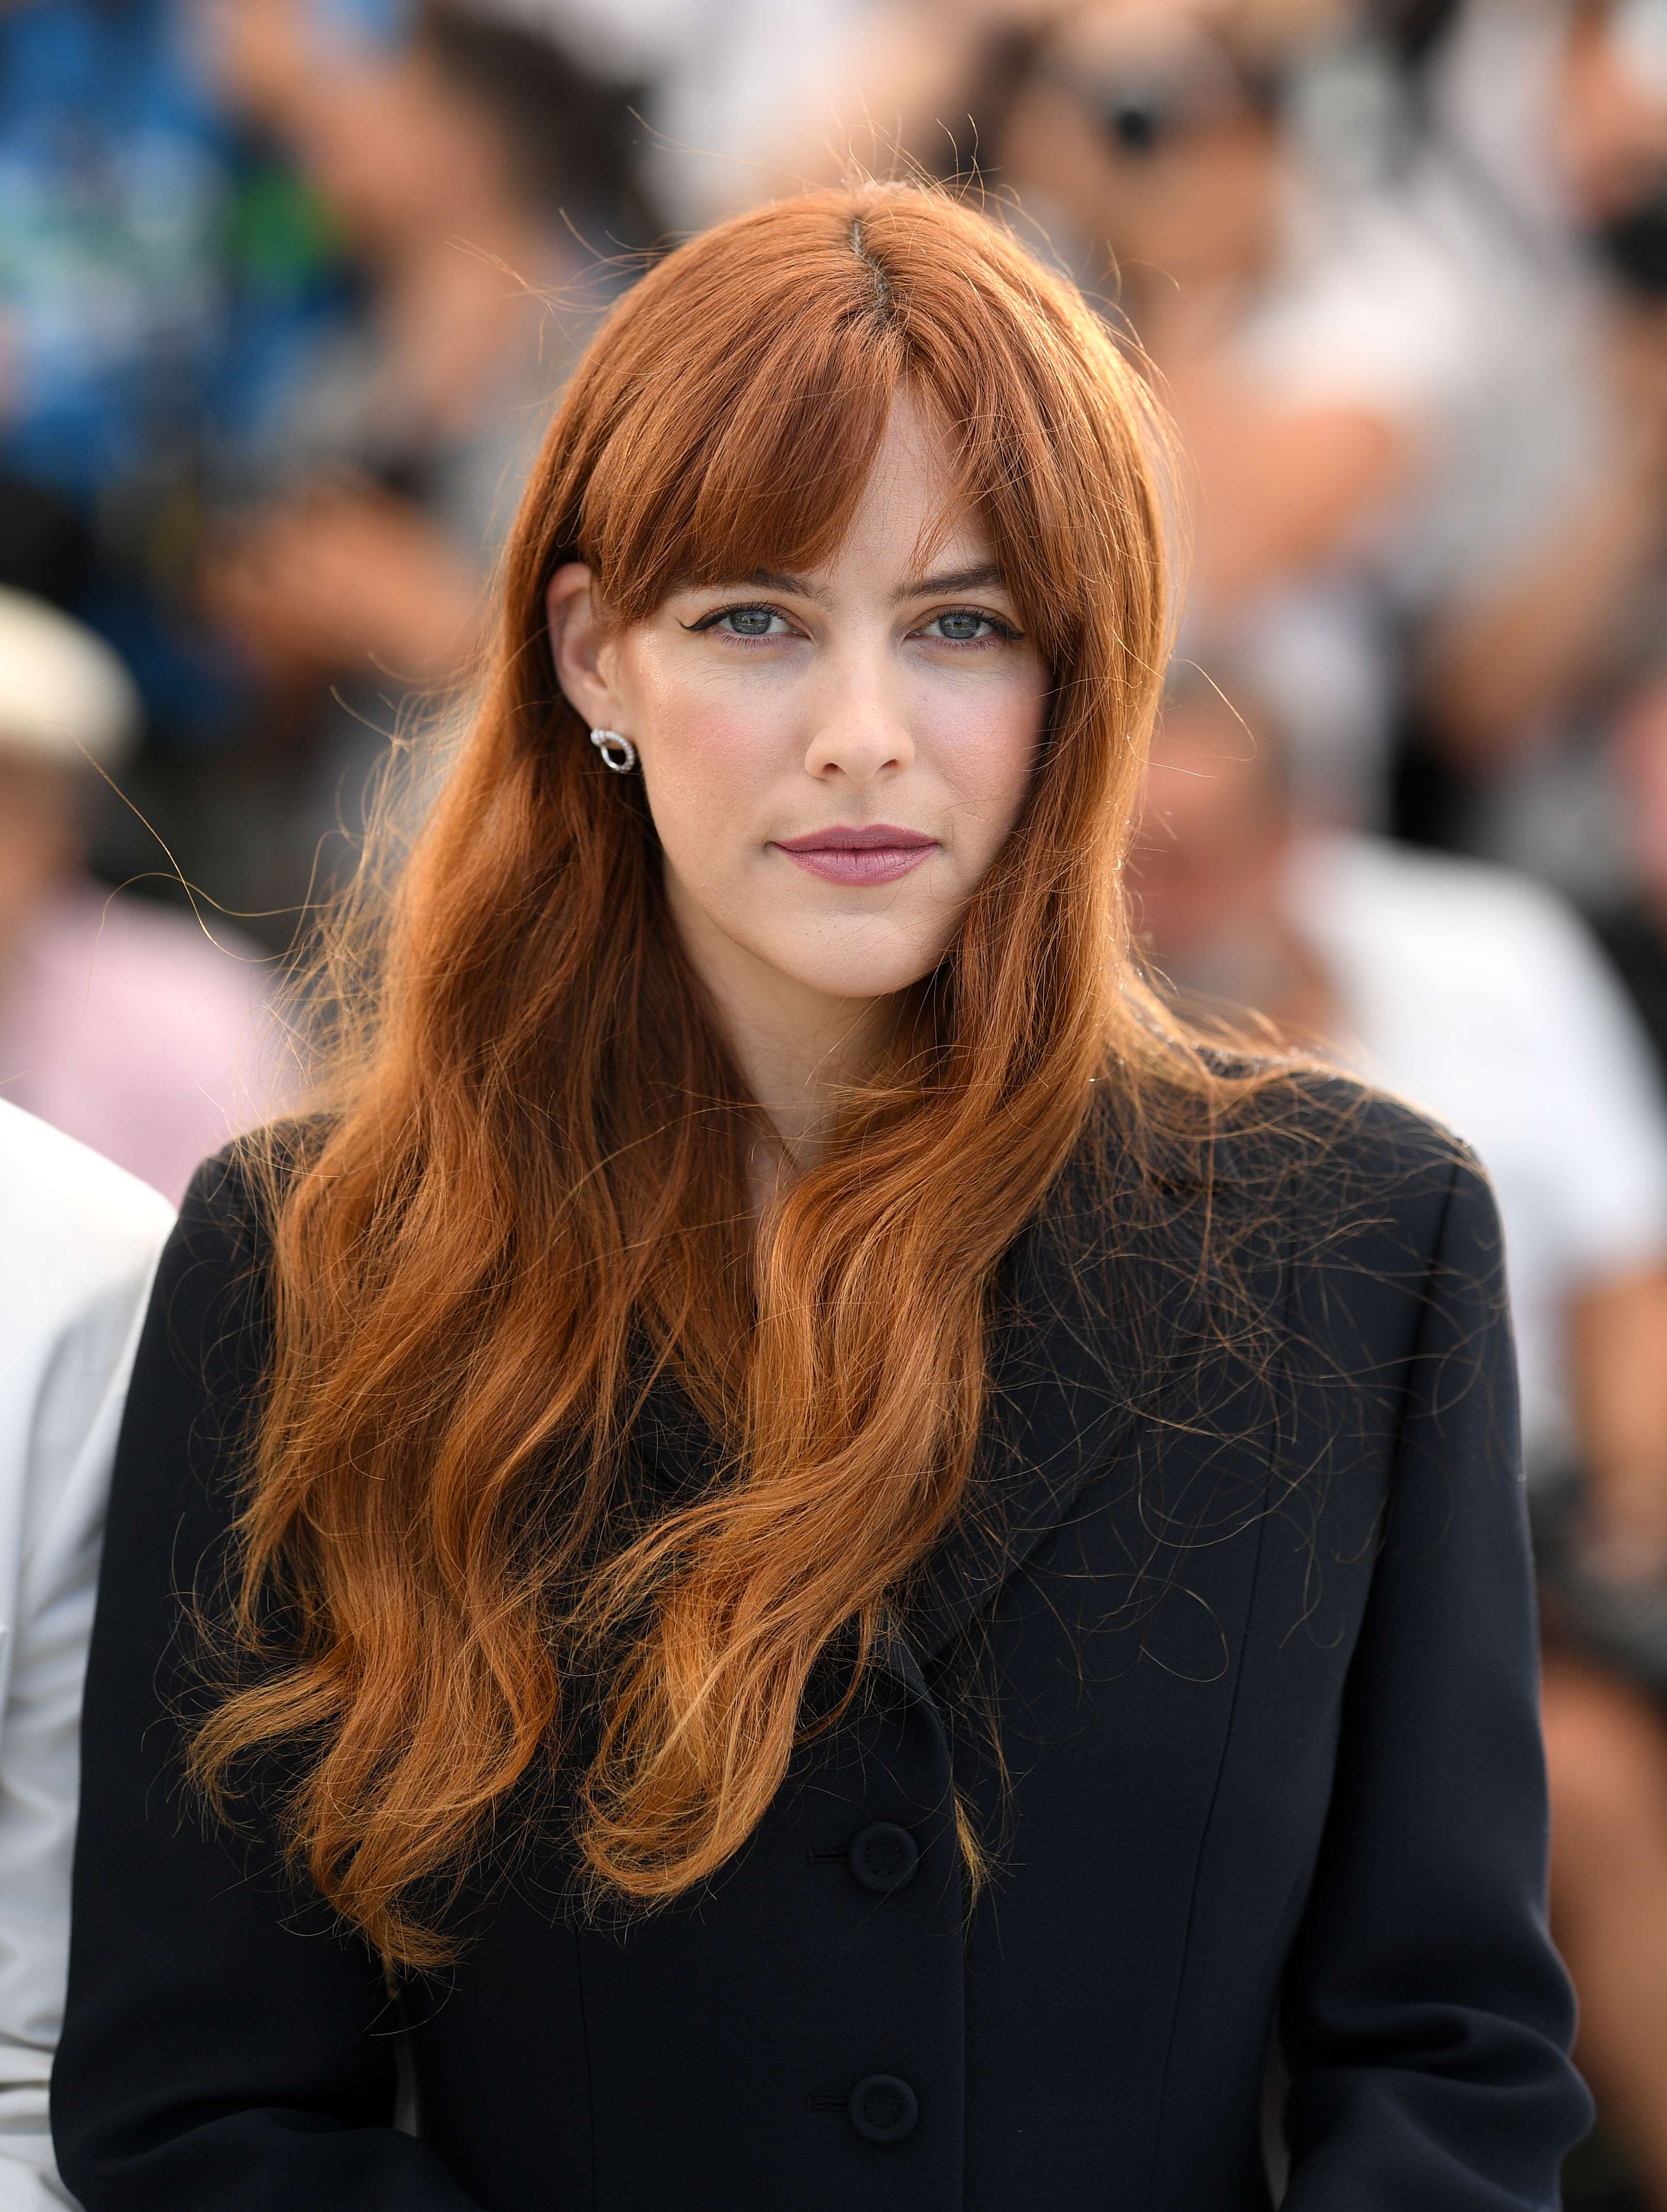 Riley Keough during the 75th annual Cannes film festival at Palais des Festivals on May 21, 2022 in Cannes, France. | Source: Getty Images